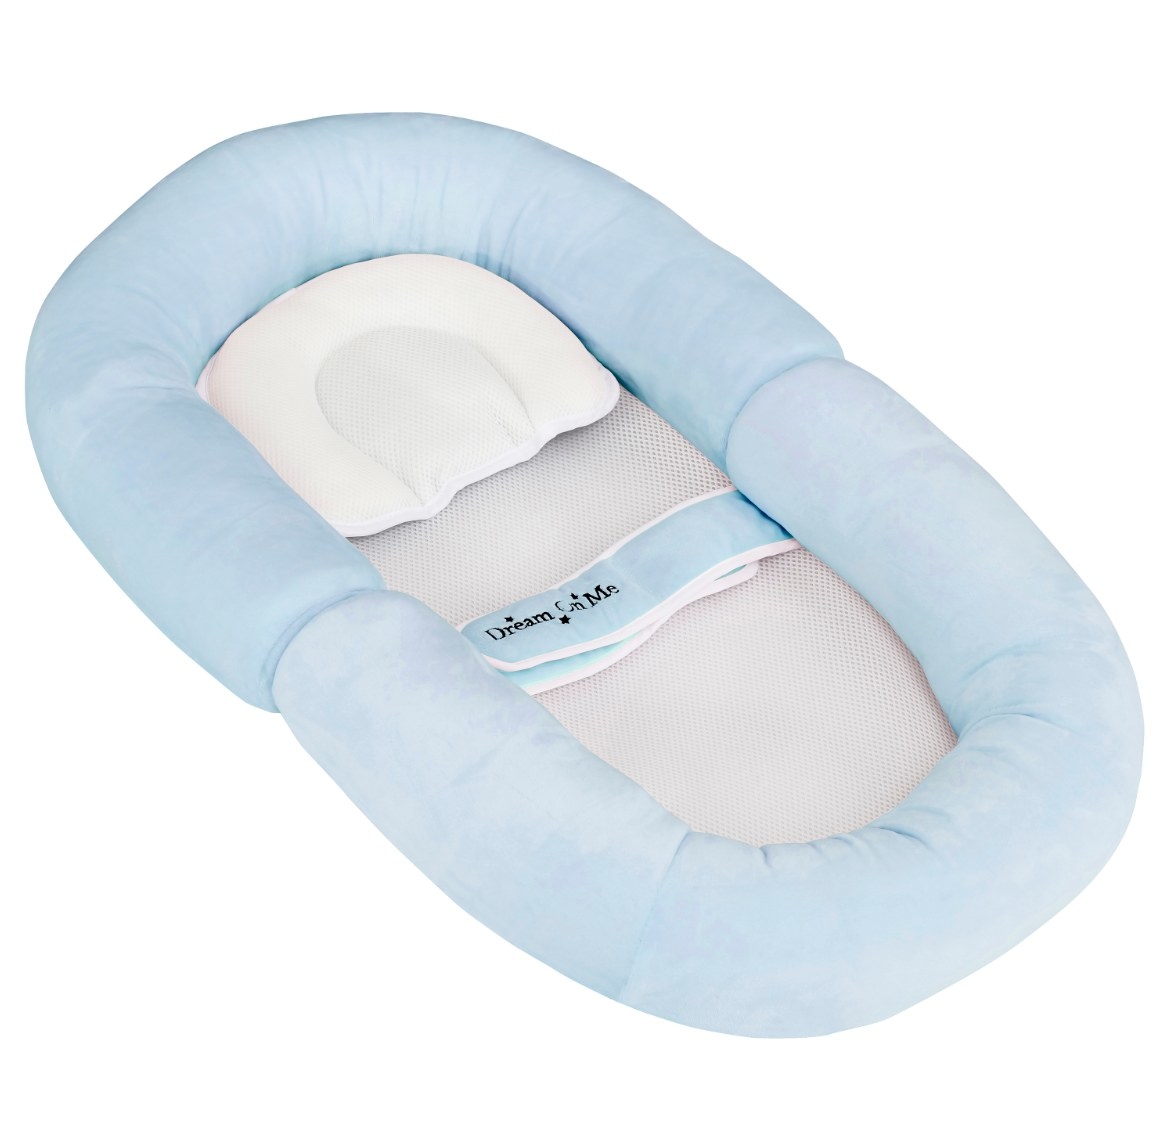 The Dream On Me portable lounger in baby blue